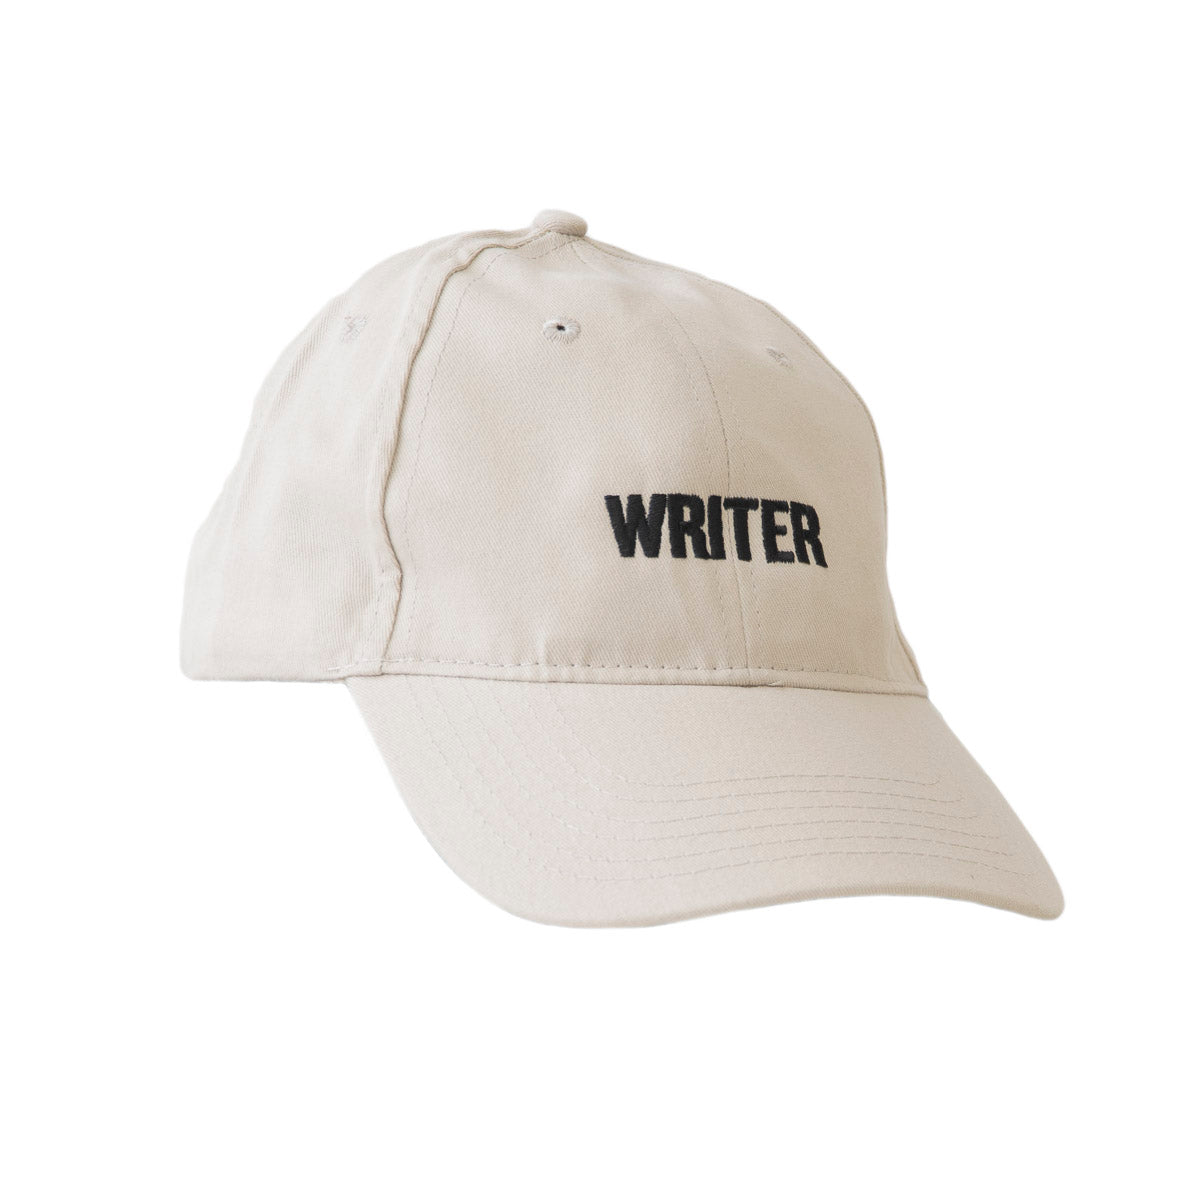 Writer Embroidered Film Role Baseball Cap, Size: One Size